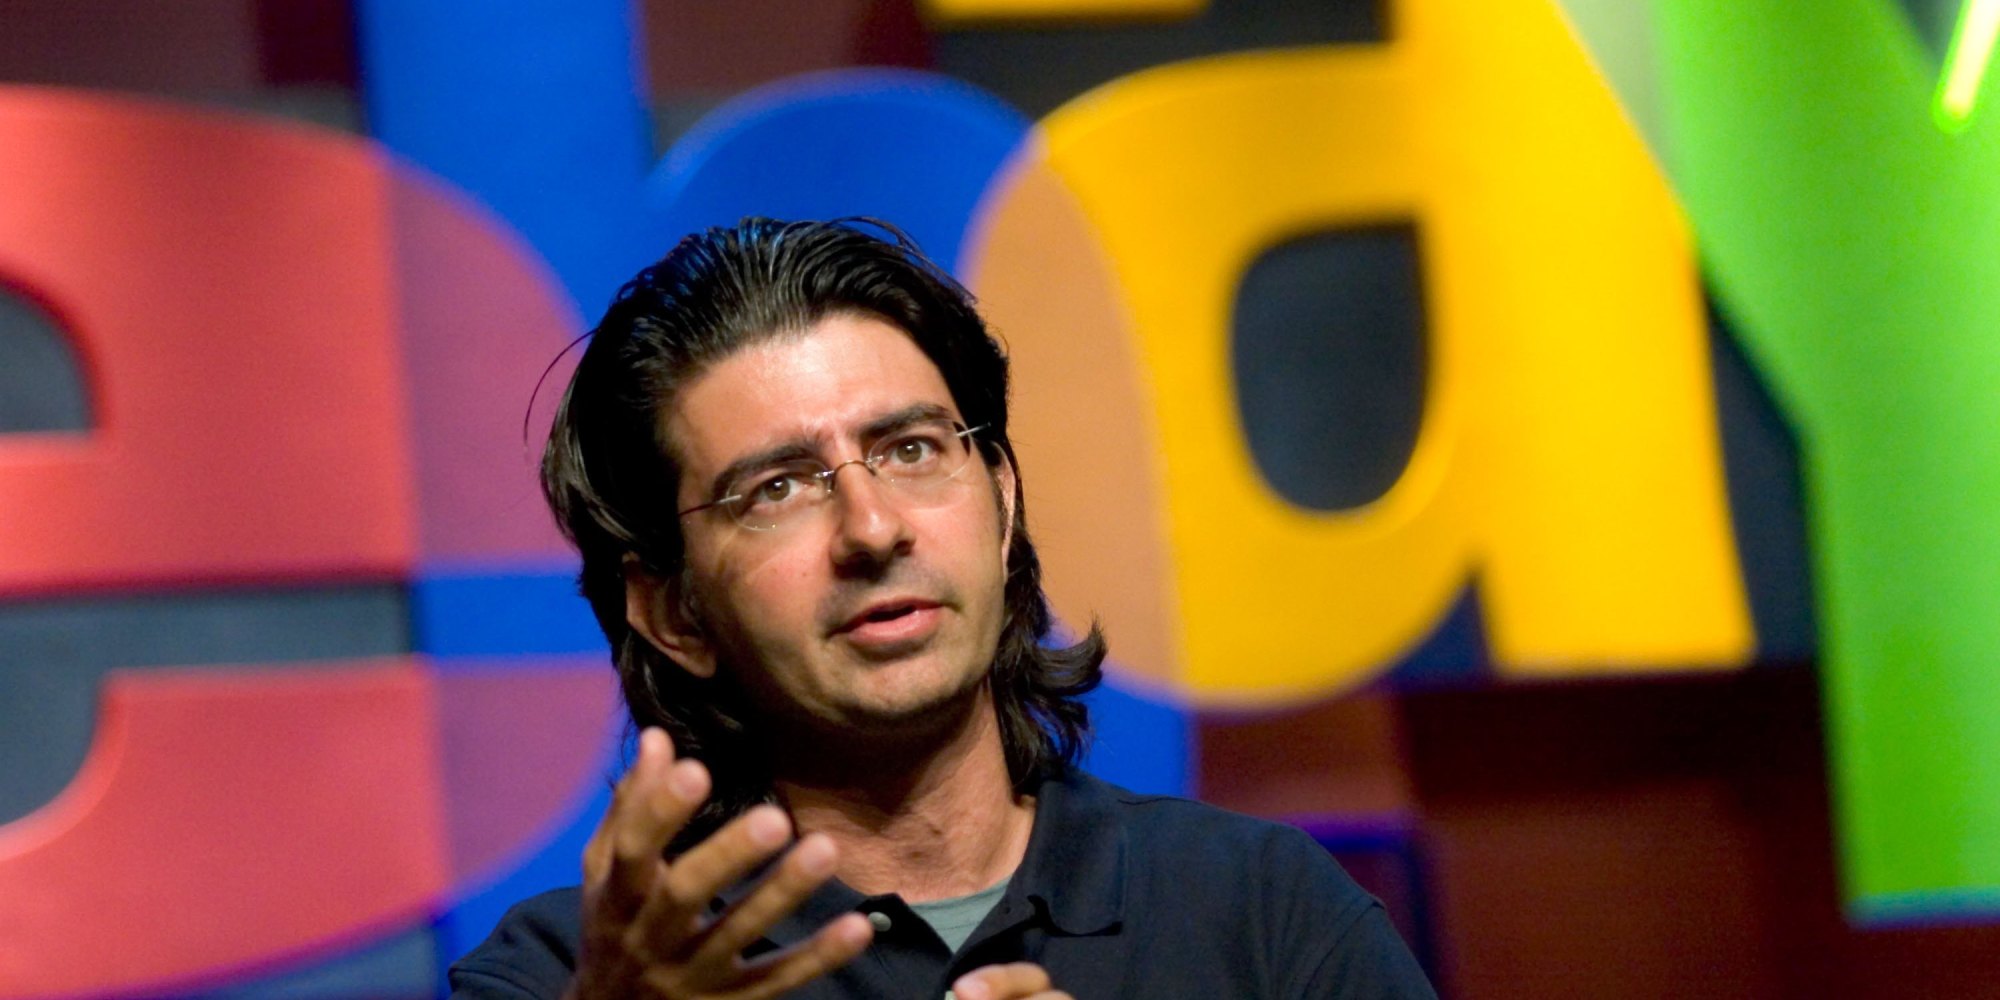 Pierre Omidyar, founder and chairman